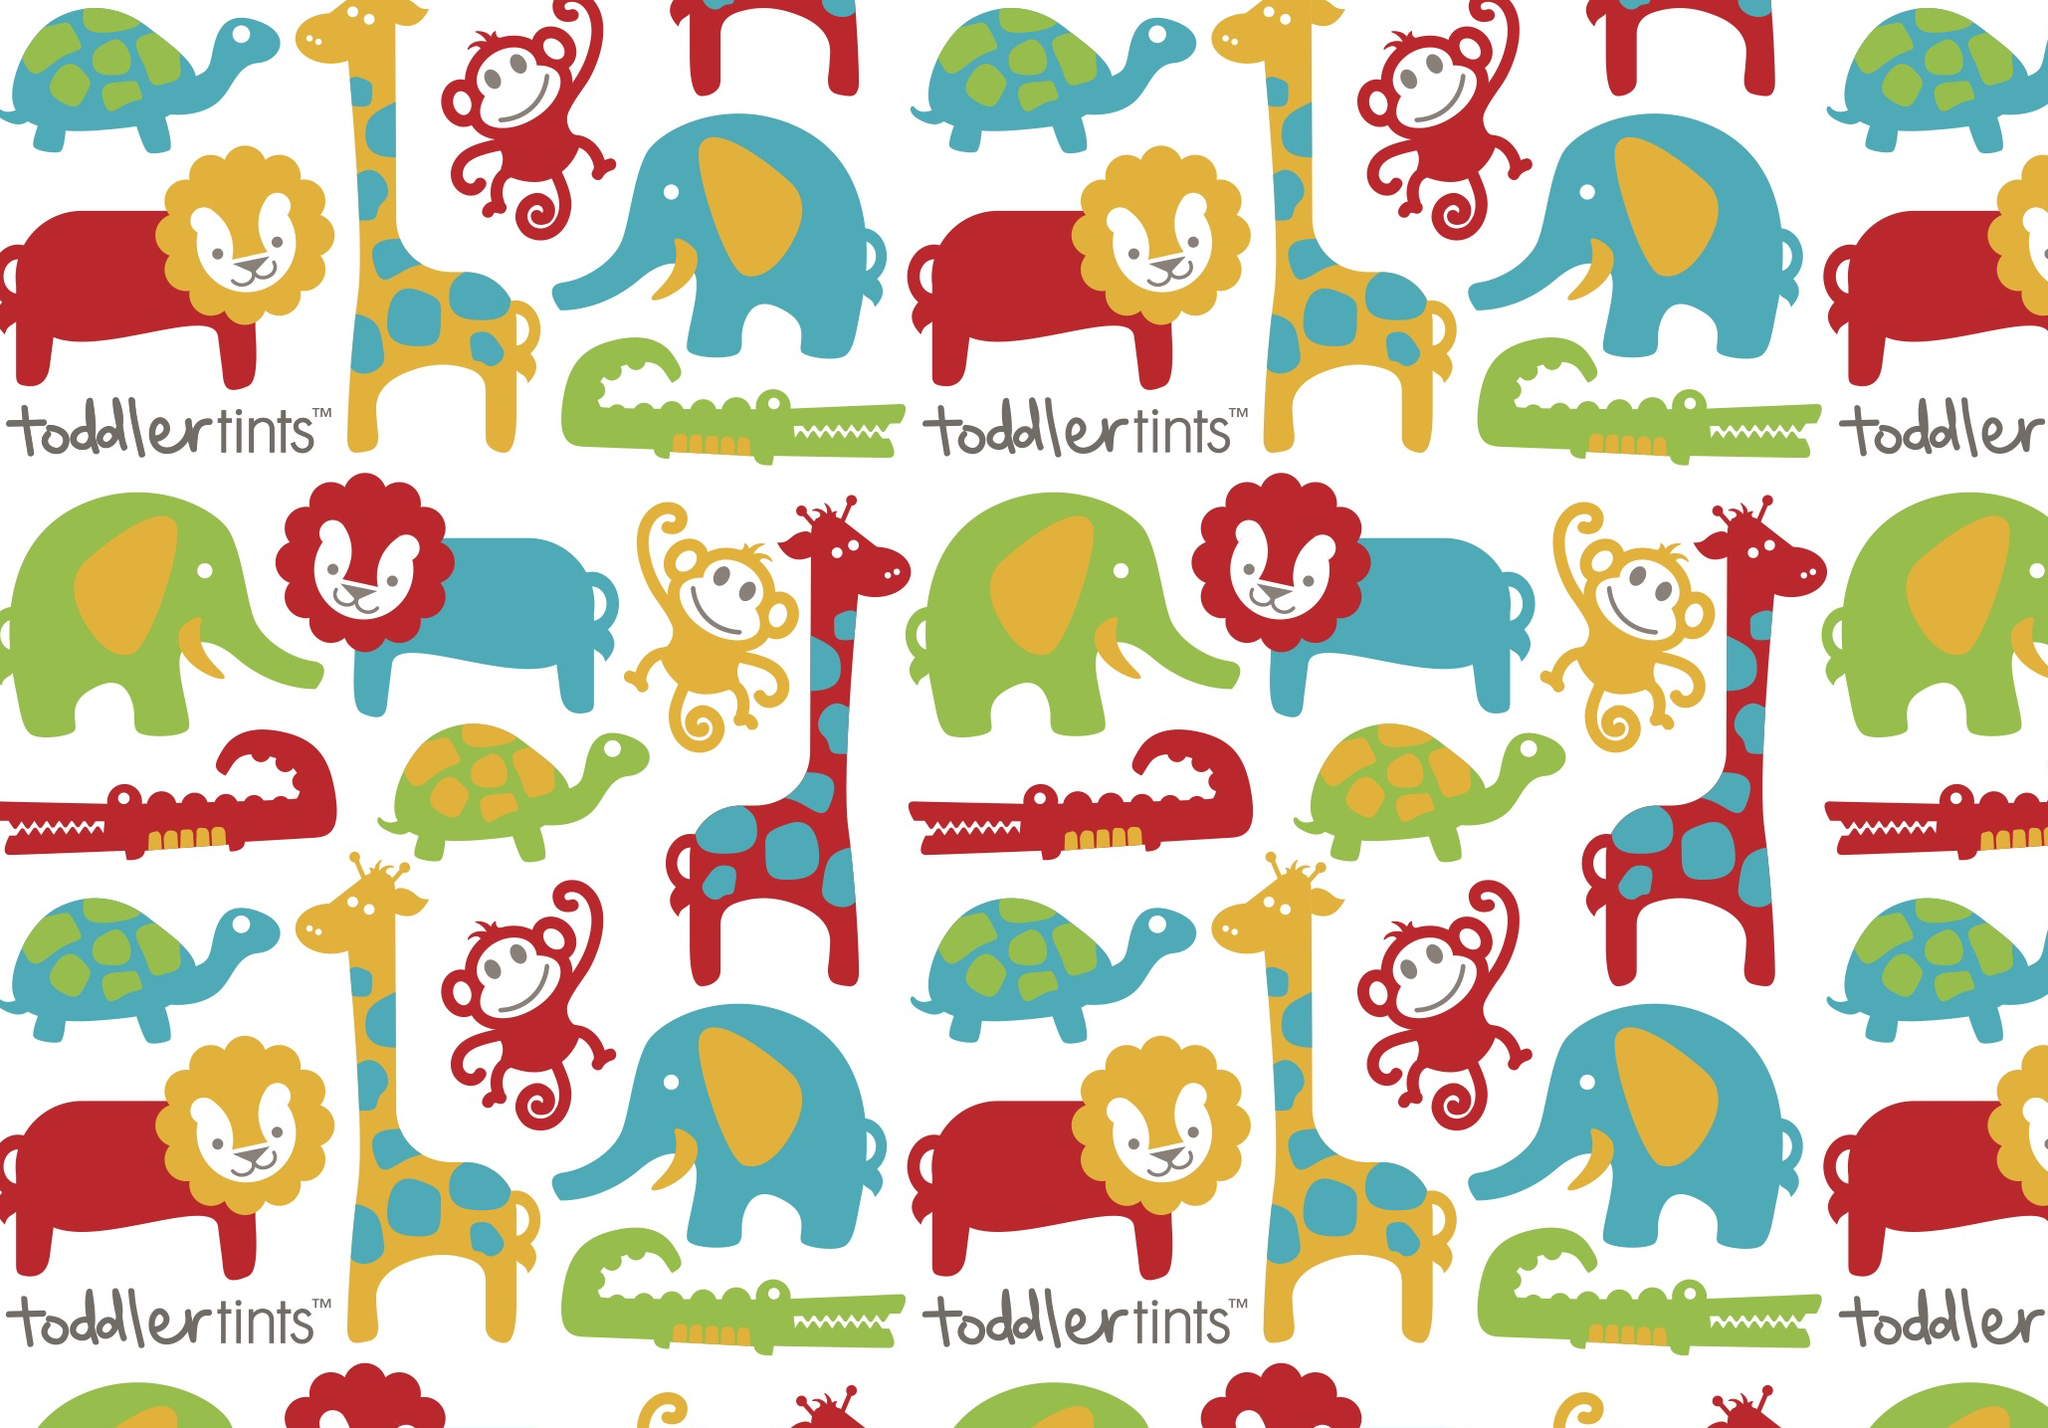 Toddler Tints - Zoo Friends